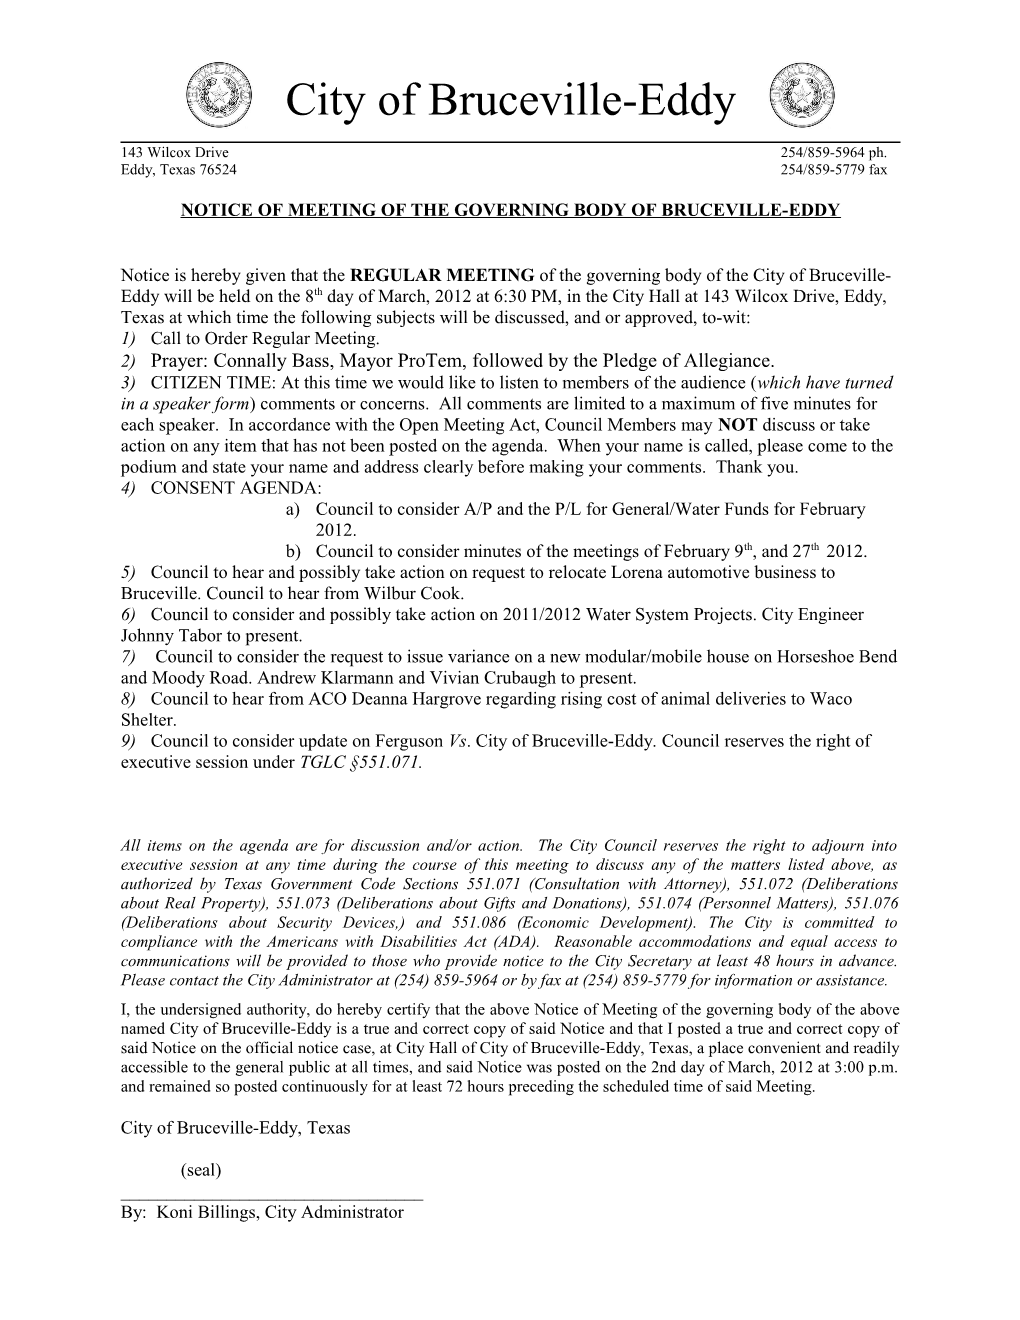 Notice of Meeting of the Governing Body of Bruceville-Eddy